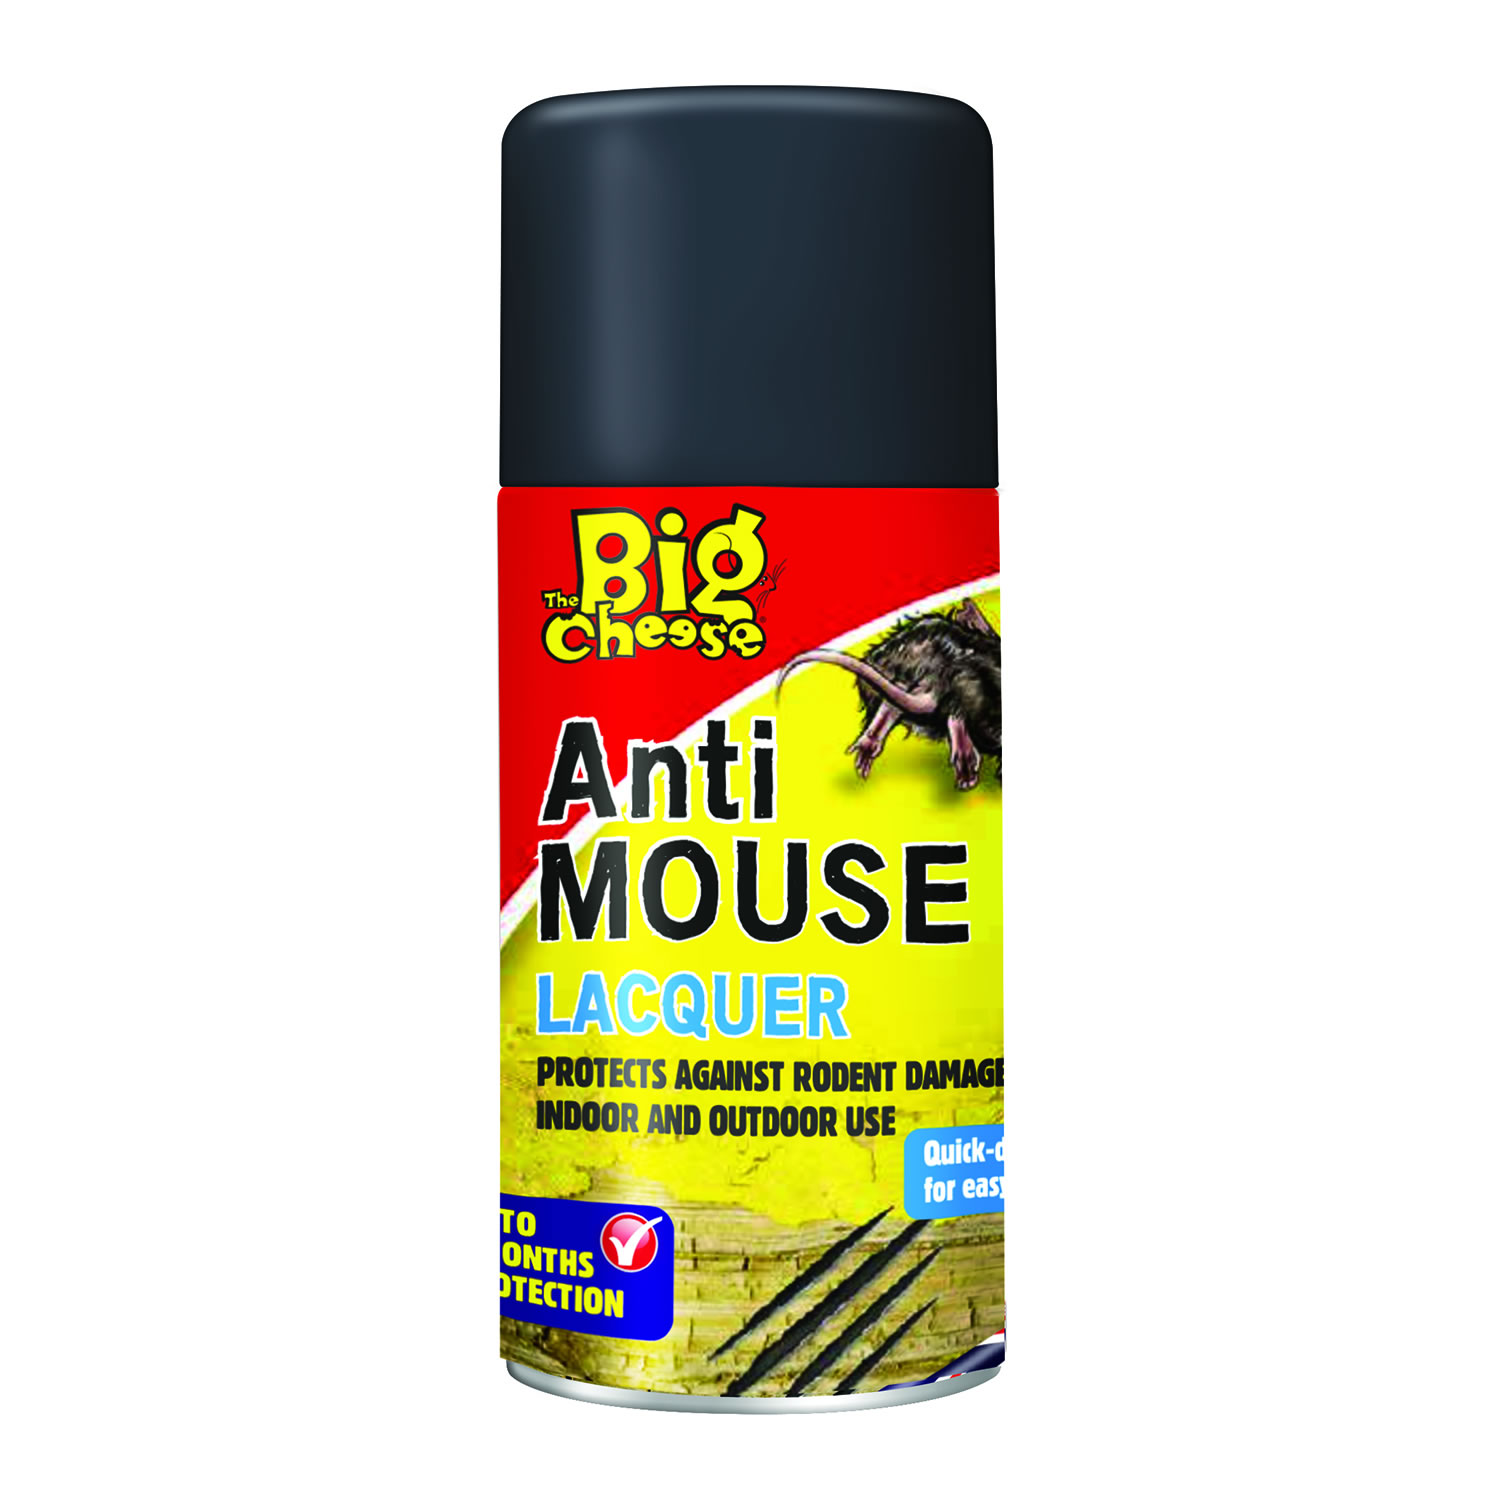 THE BIG CHEESE ANTI MOUSE LACQUER 300 ML